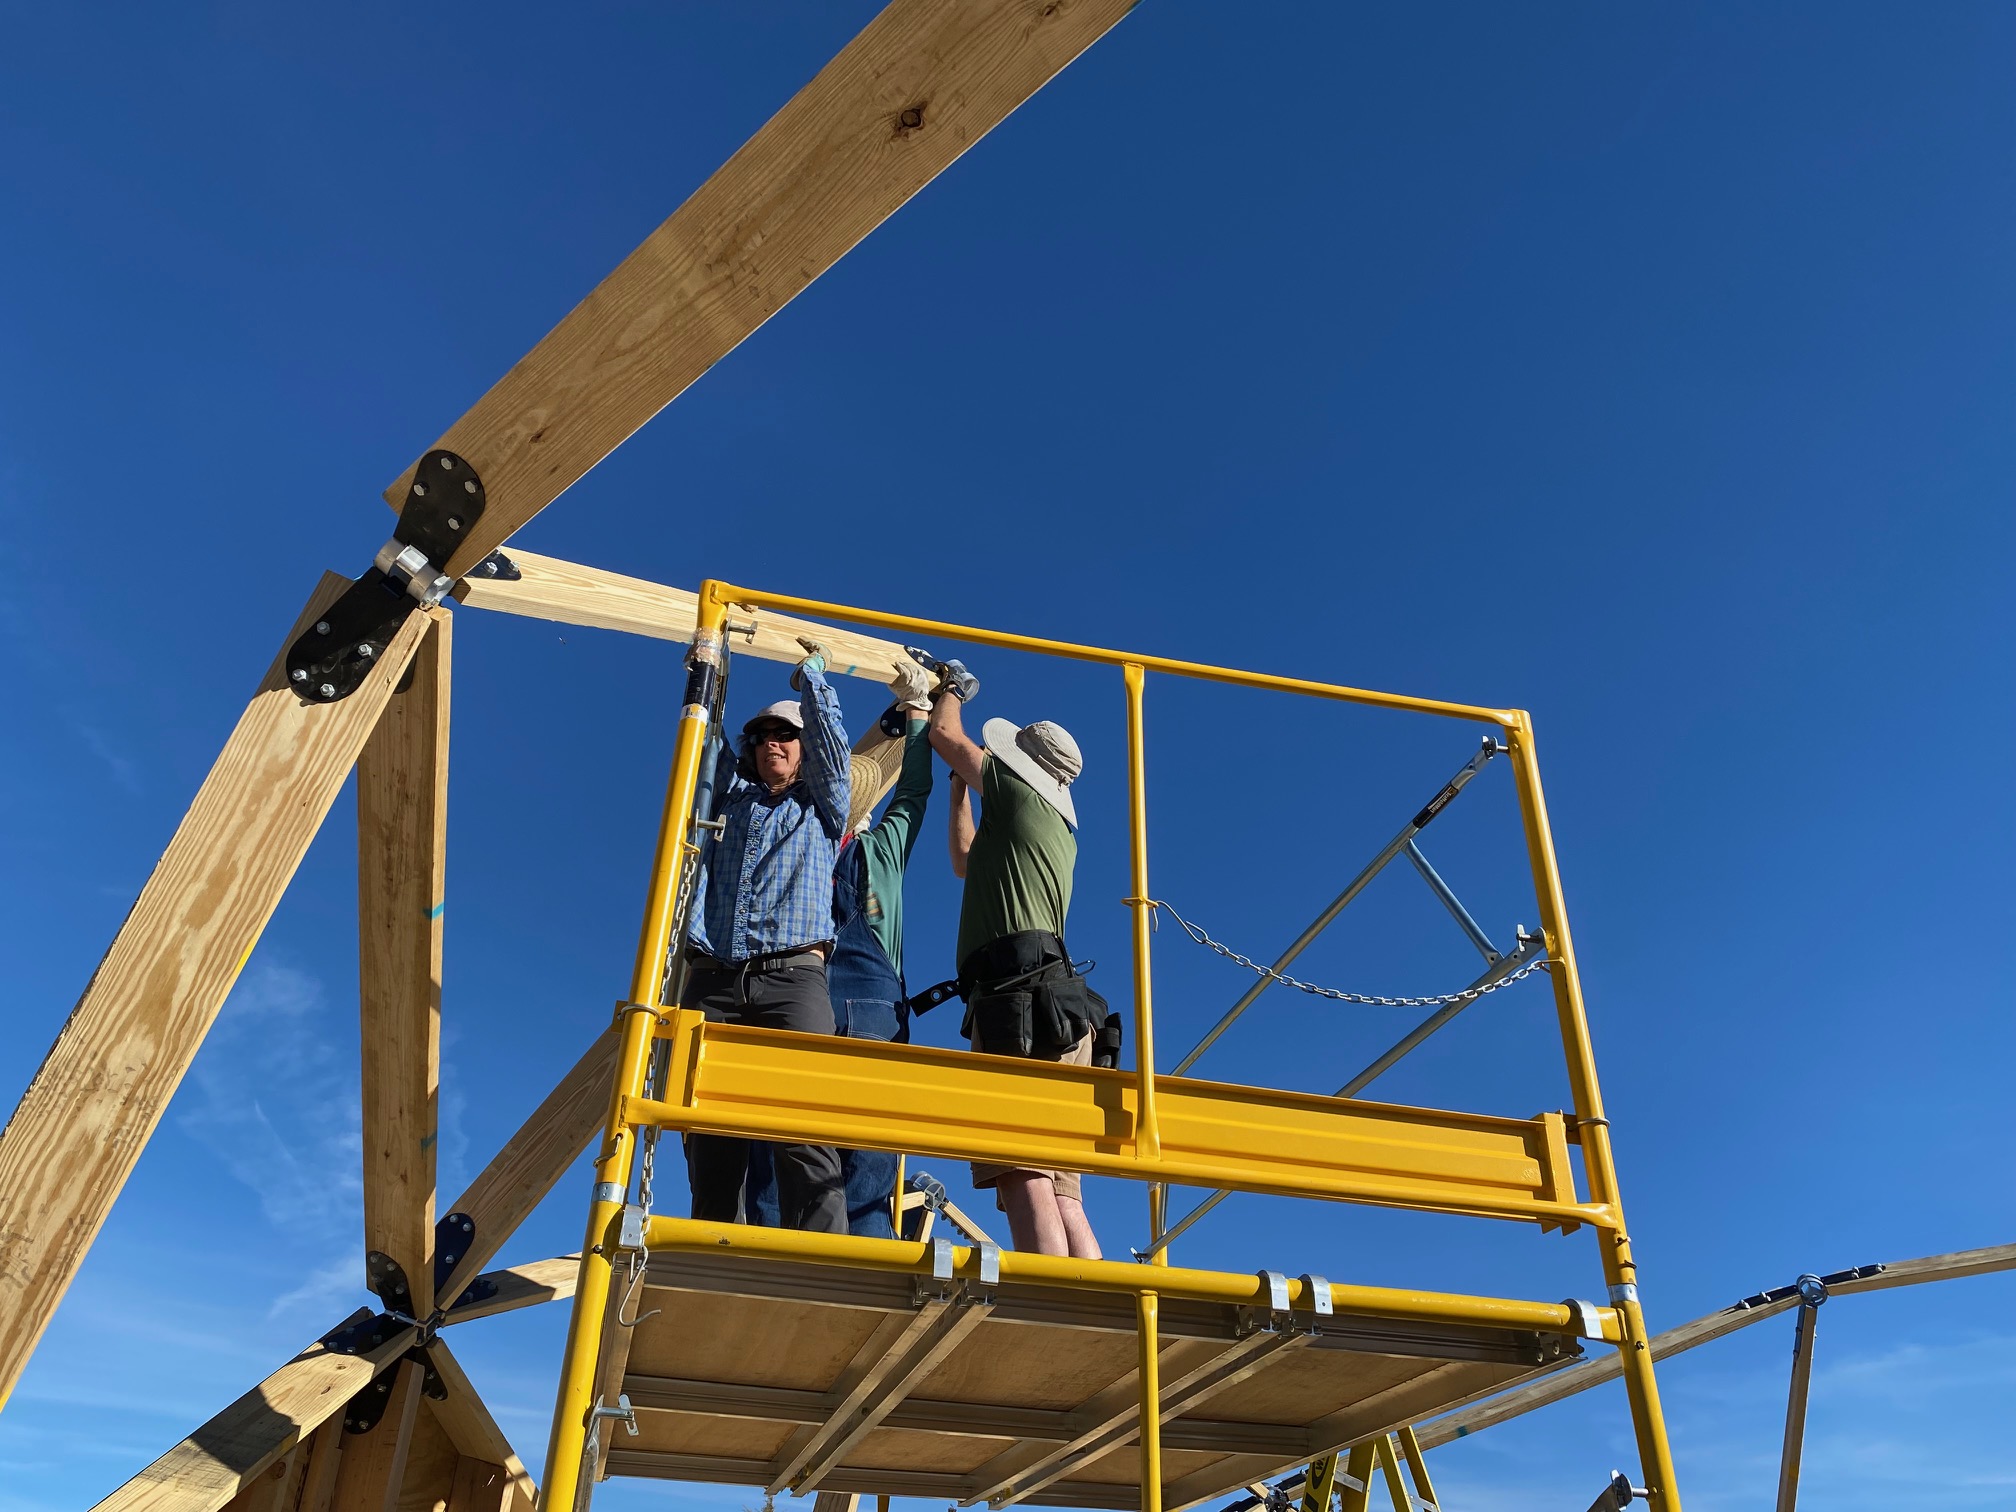 Two people hold struts up, while a third nails a pin in the hub connecting them, as part of geodesic dome construction.